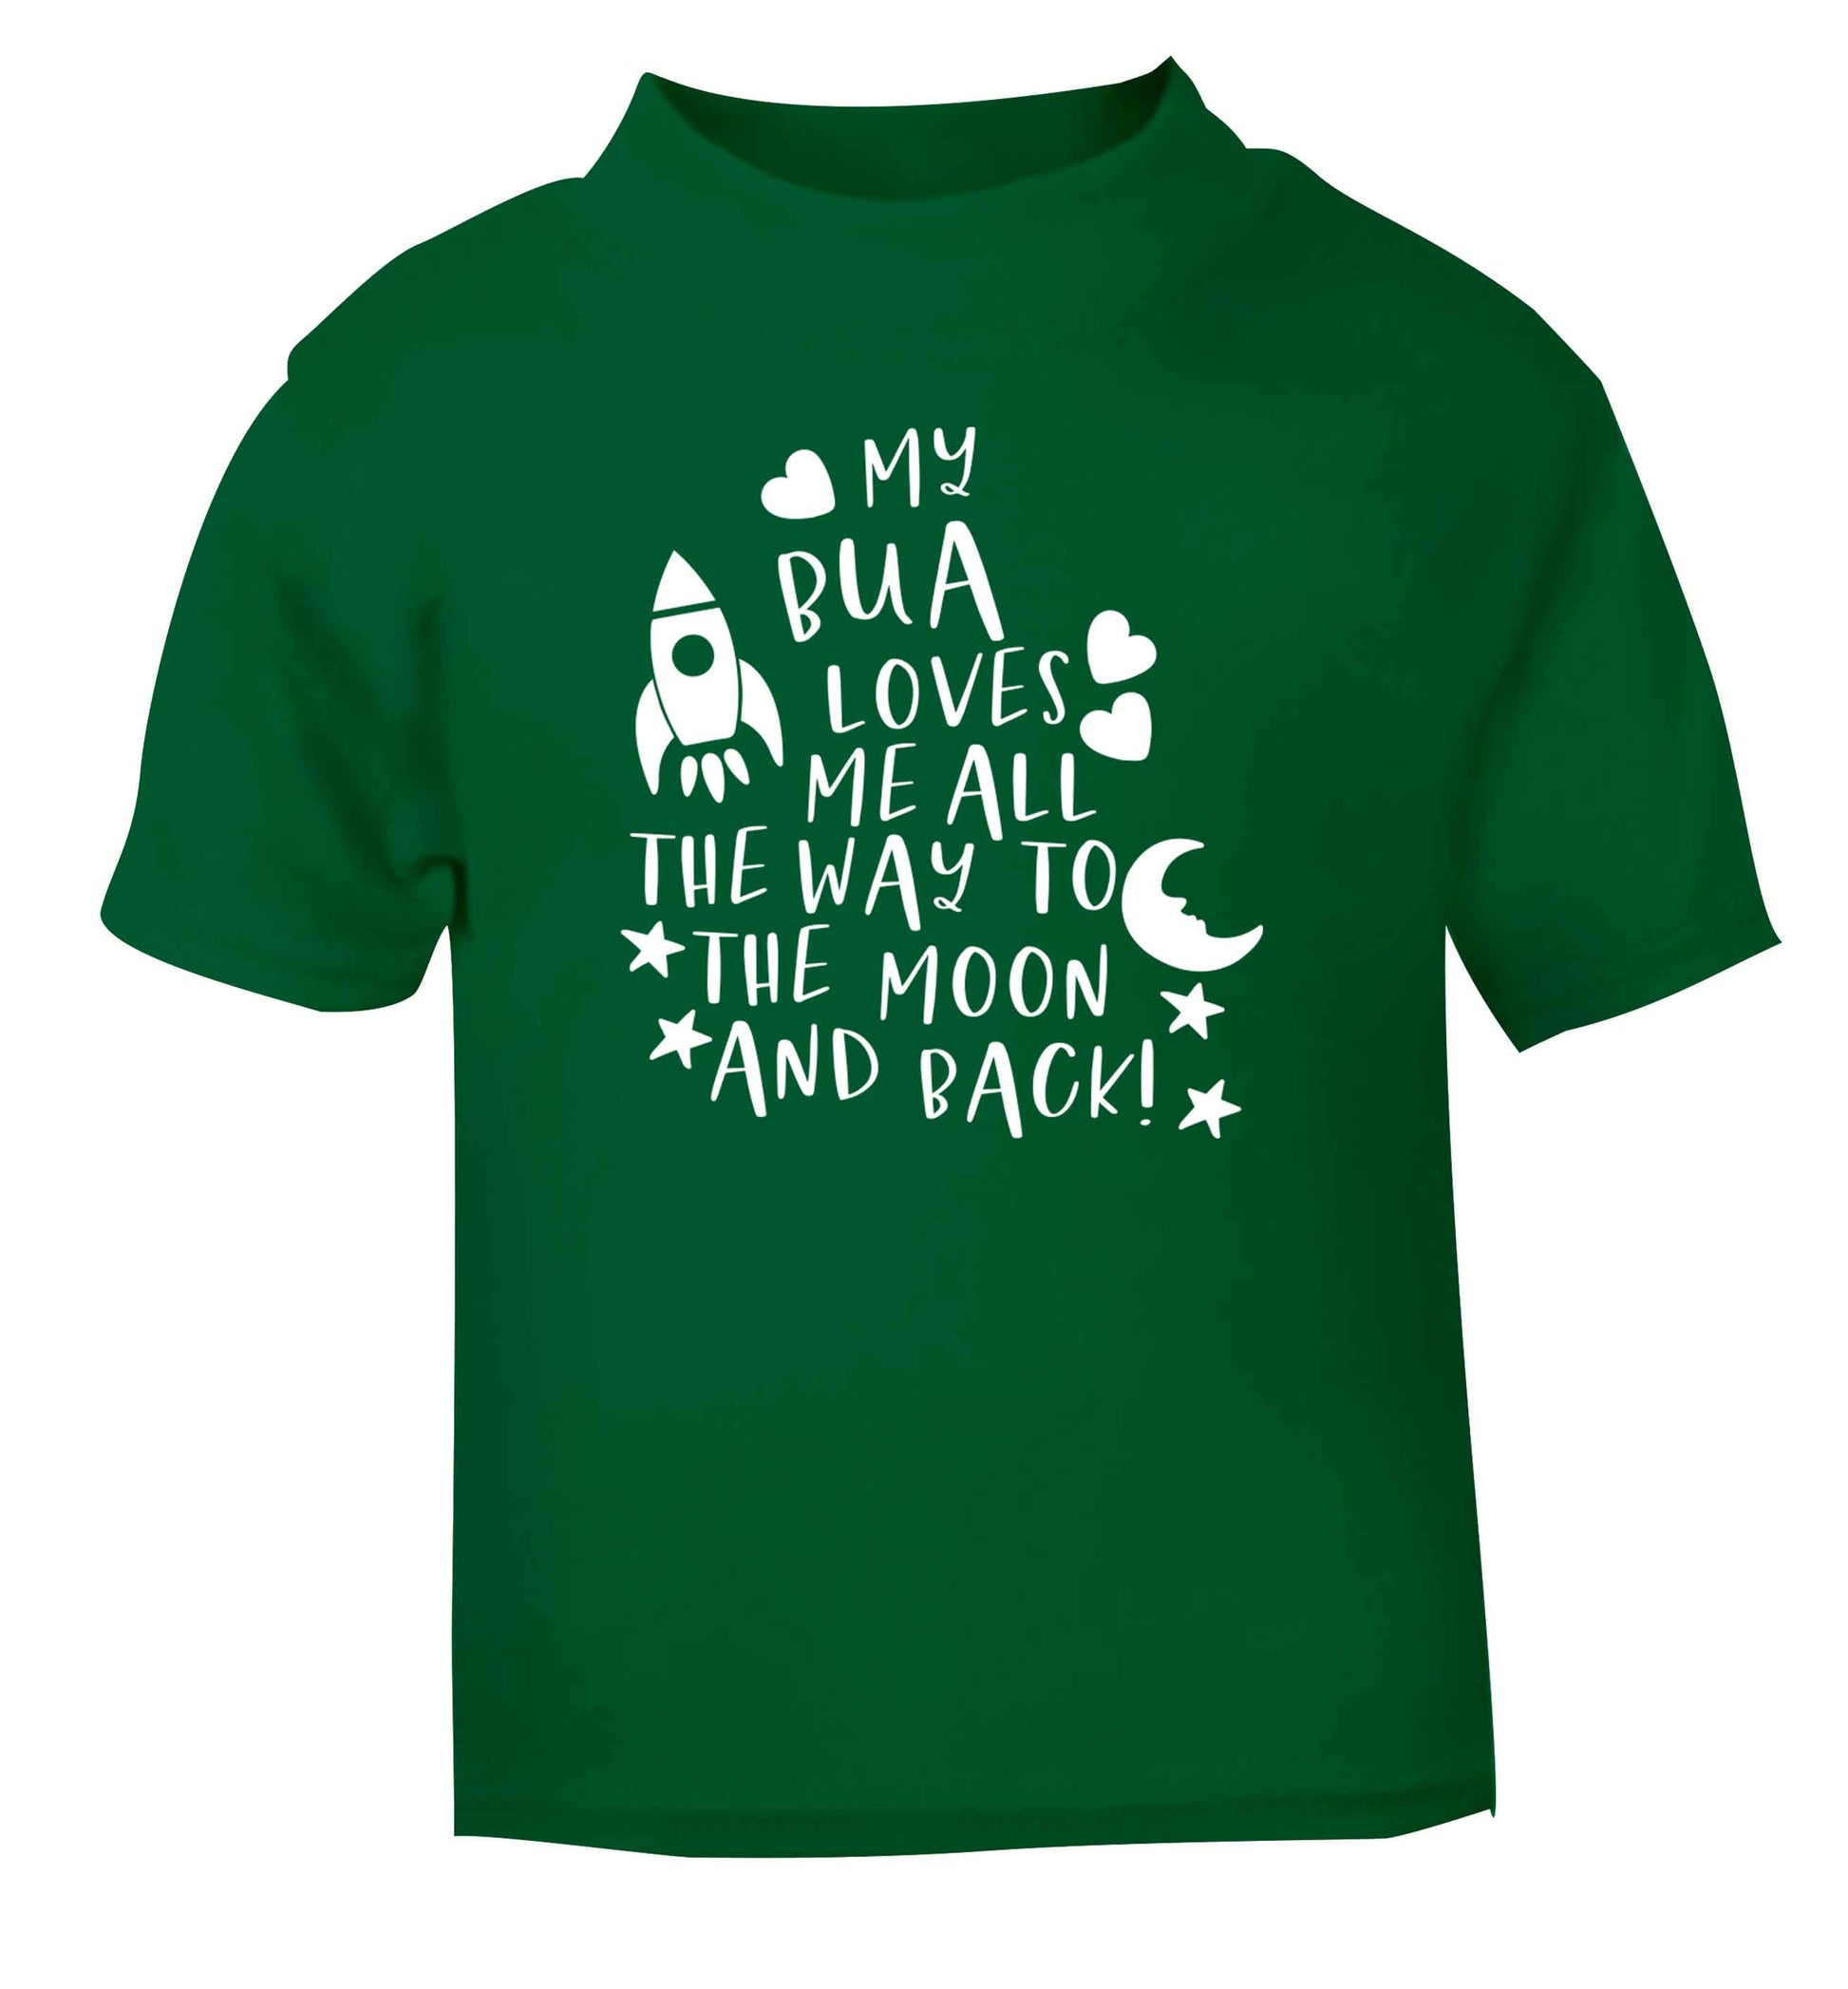 My bua loves me all they way to the moon and back green Baby Toddler Tshirt 2 Years